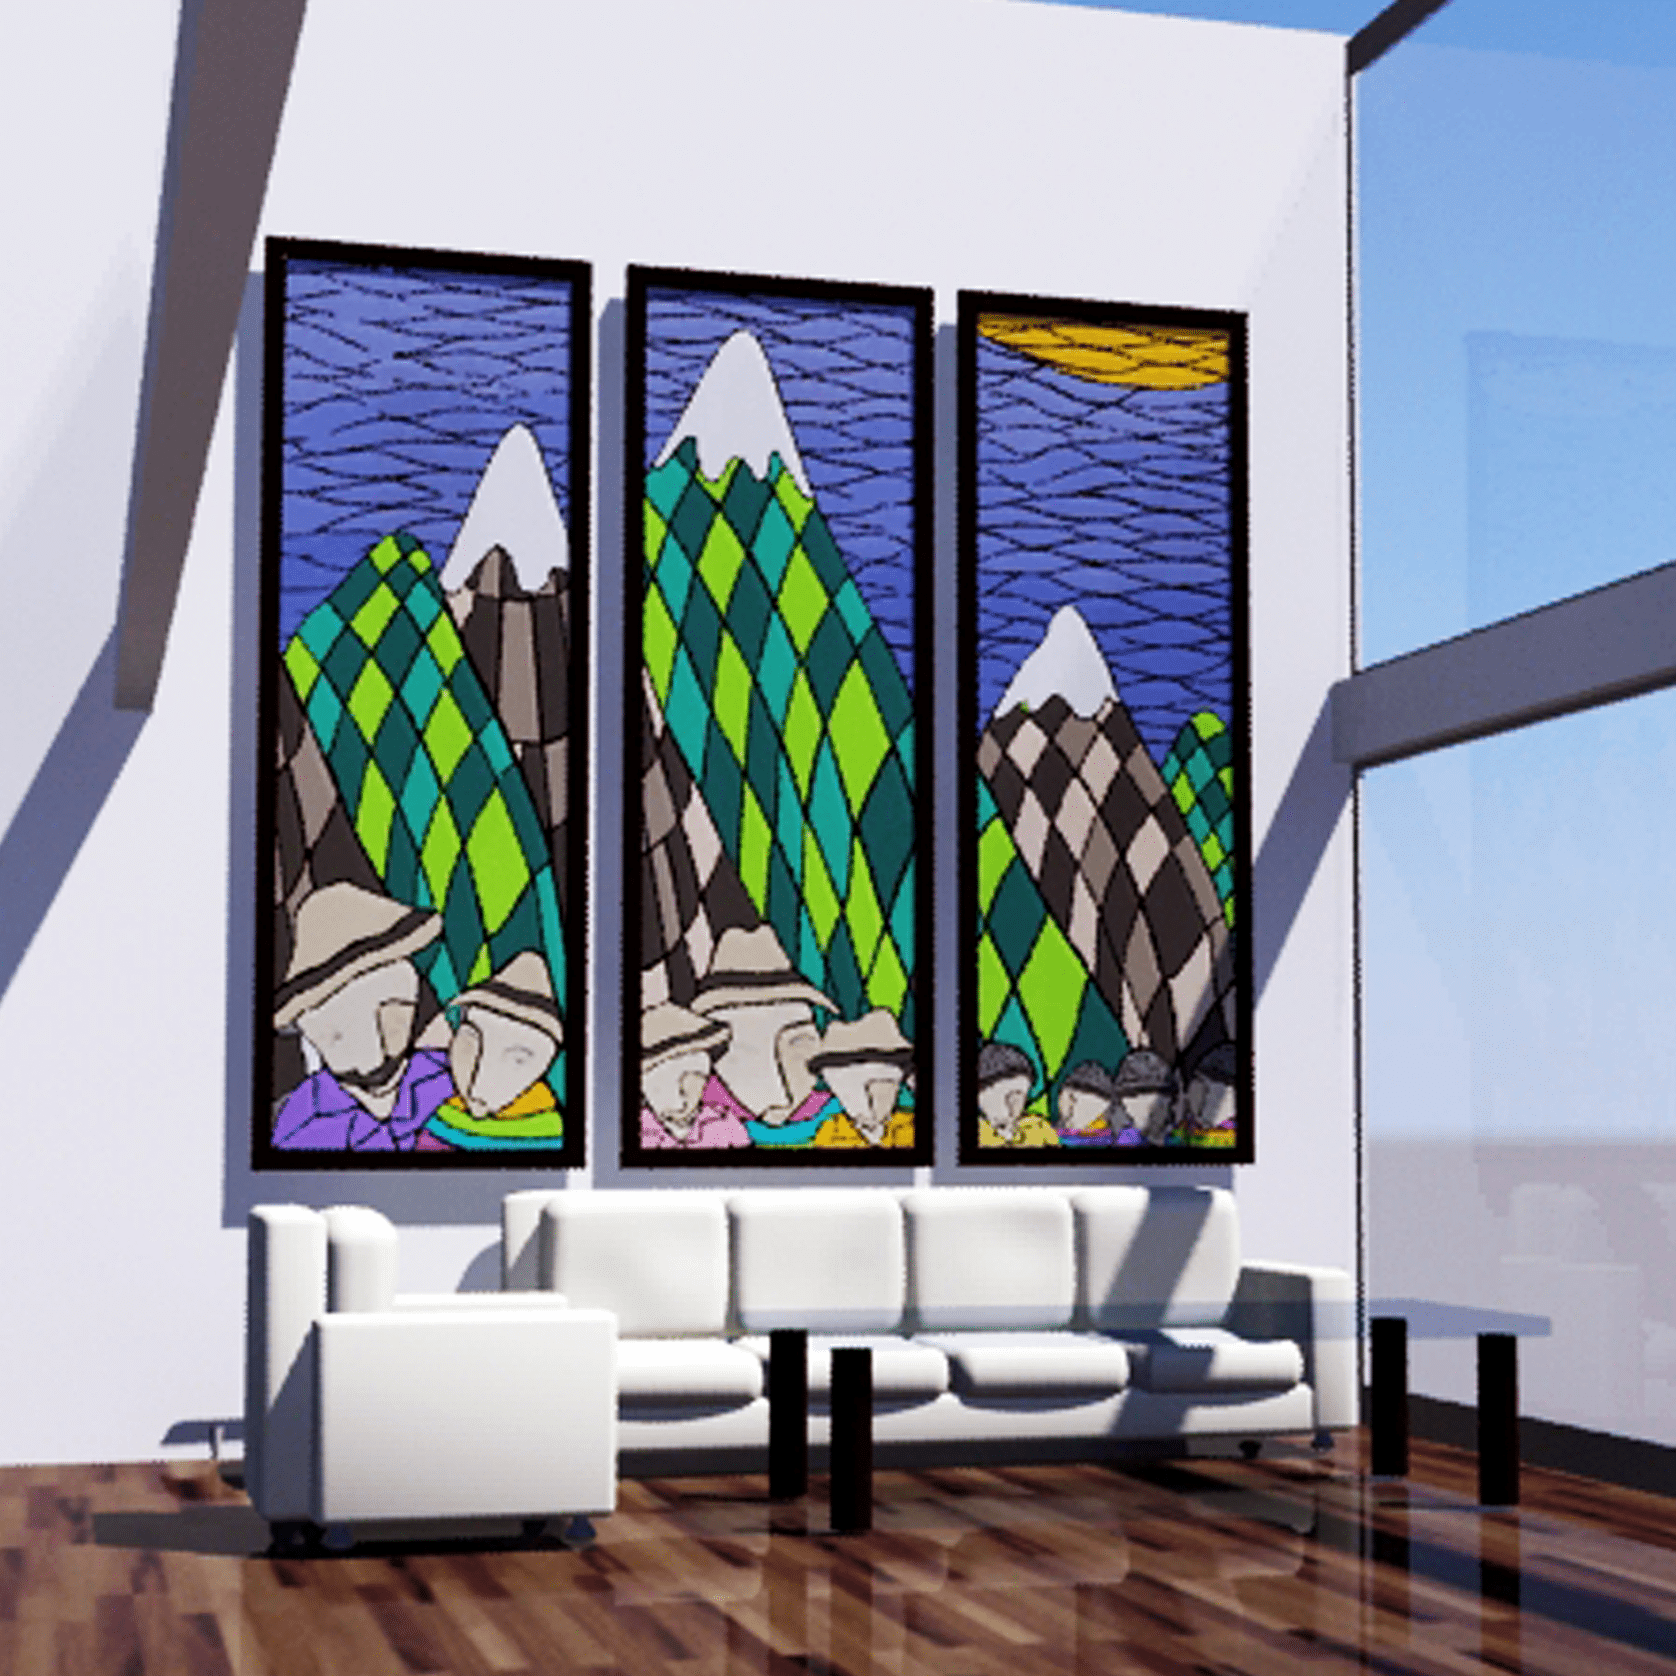 C.DEFENSORES - SNOWY MOUNTAINS - 3D GLASS MOSAIC - Bogotá-Colombia.